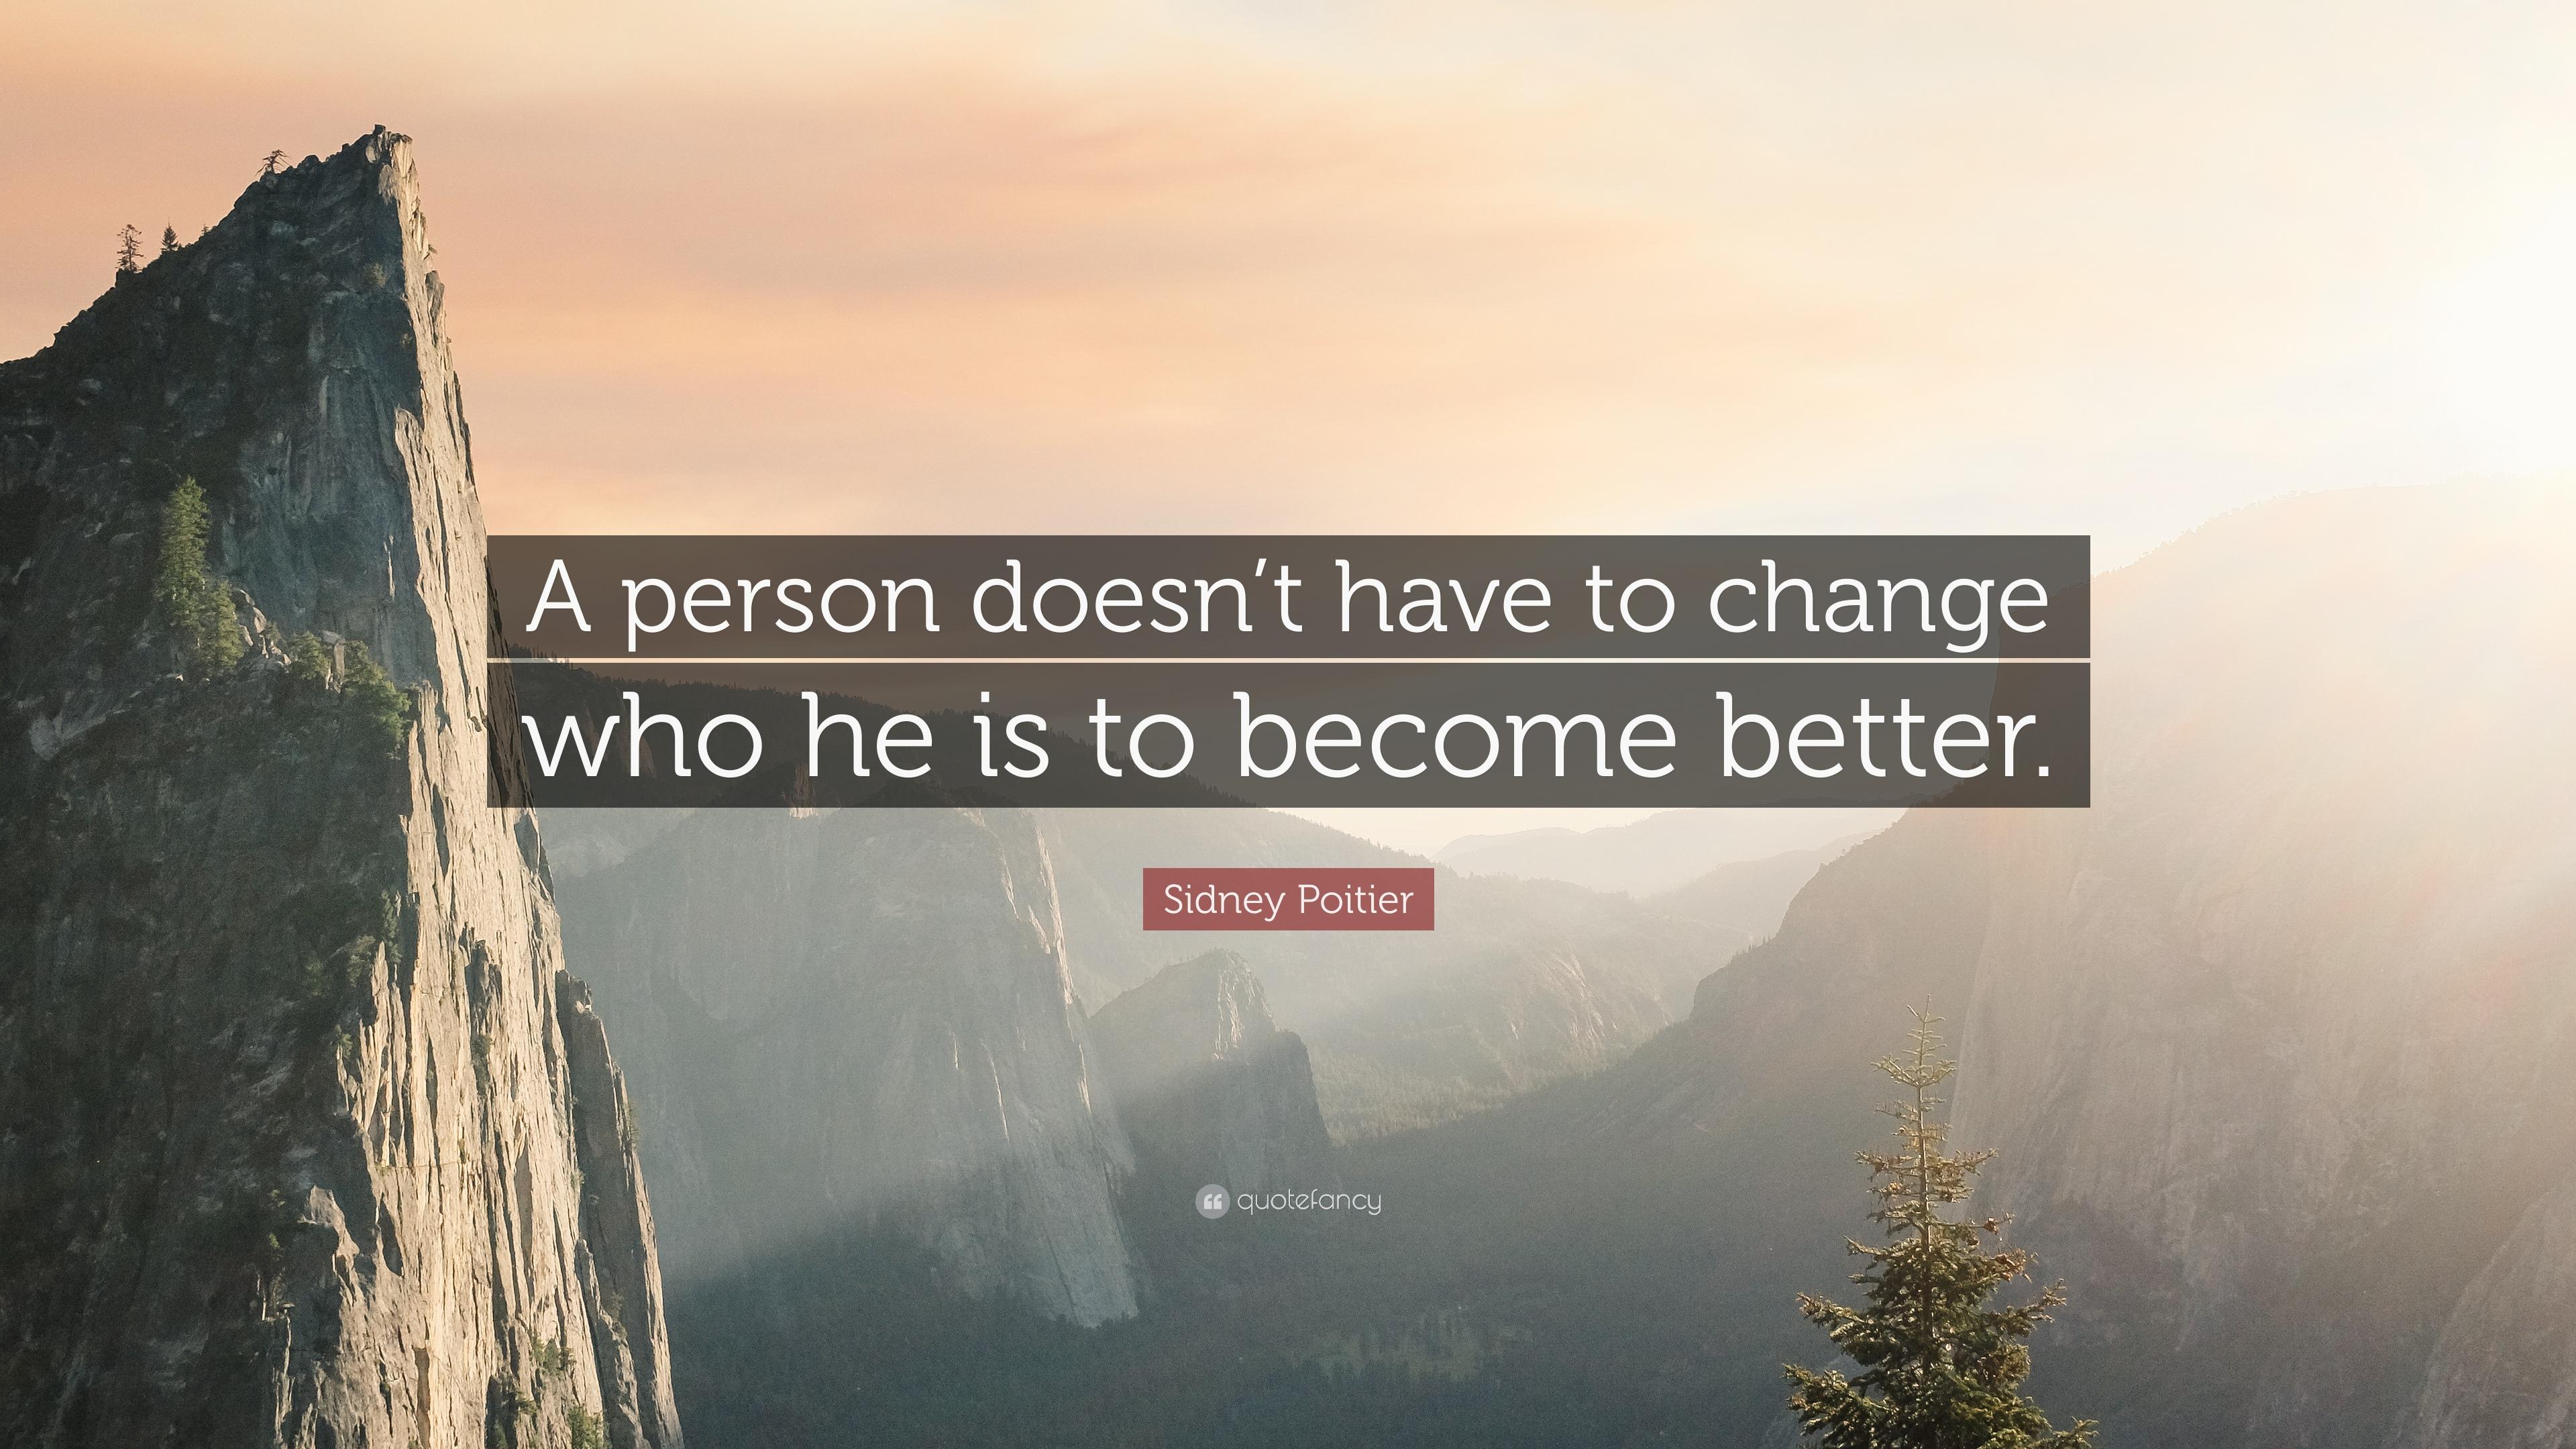 Sidney Poitier Quote: “A person doesn't have to change who he is to